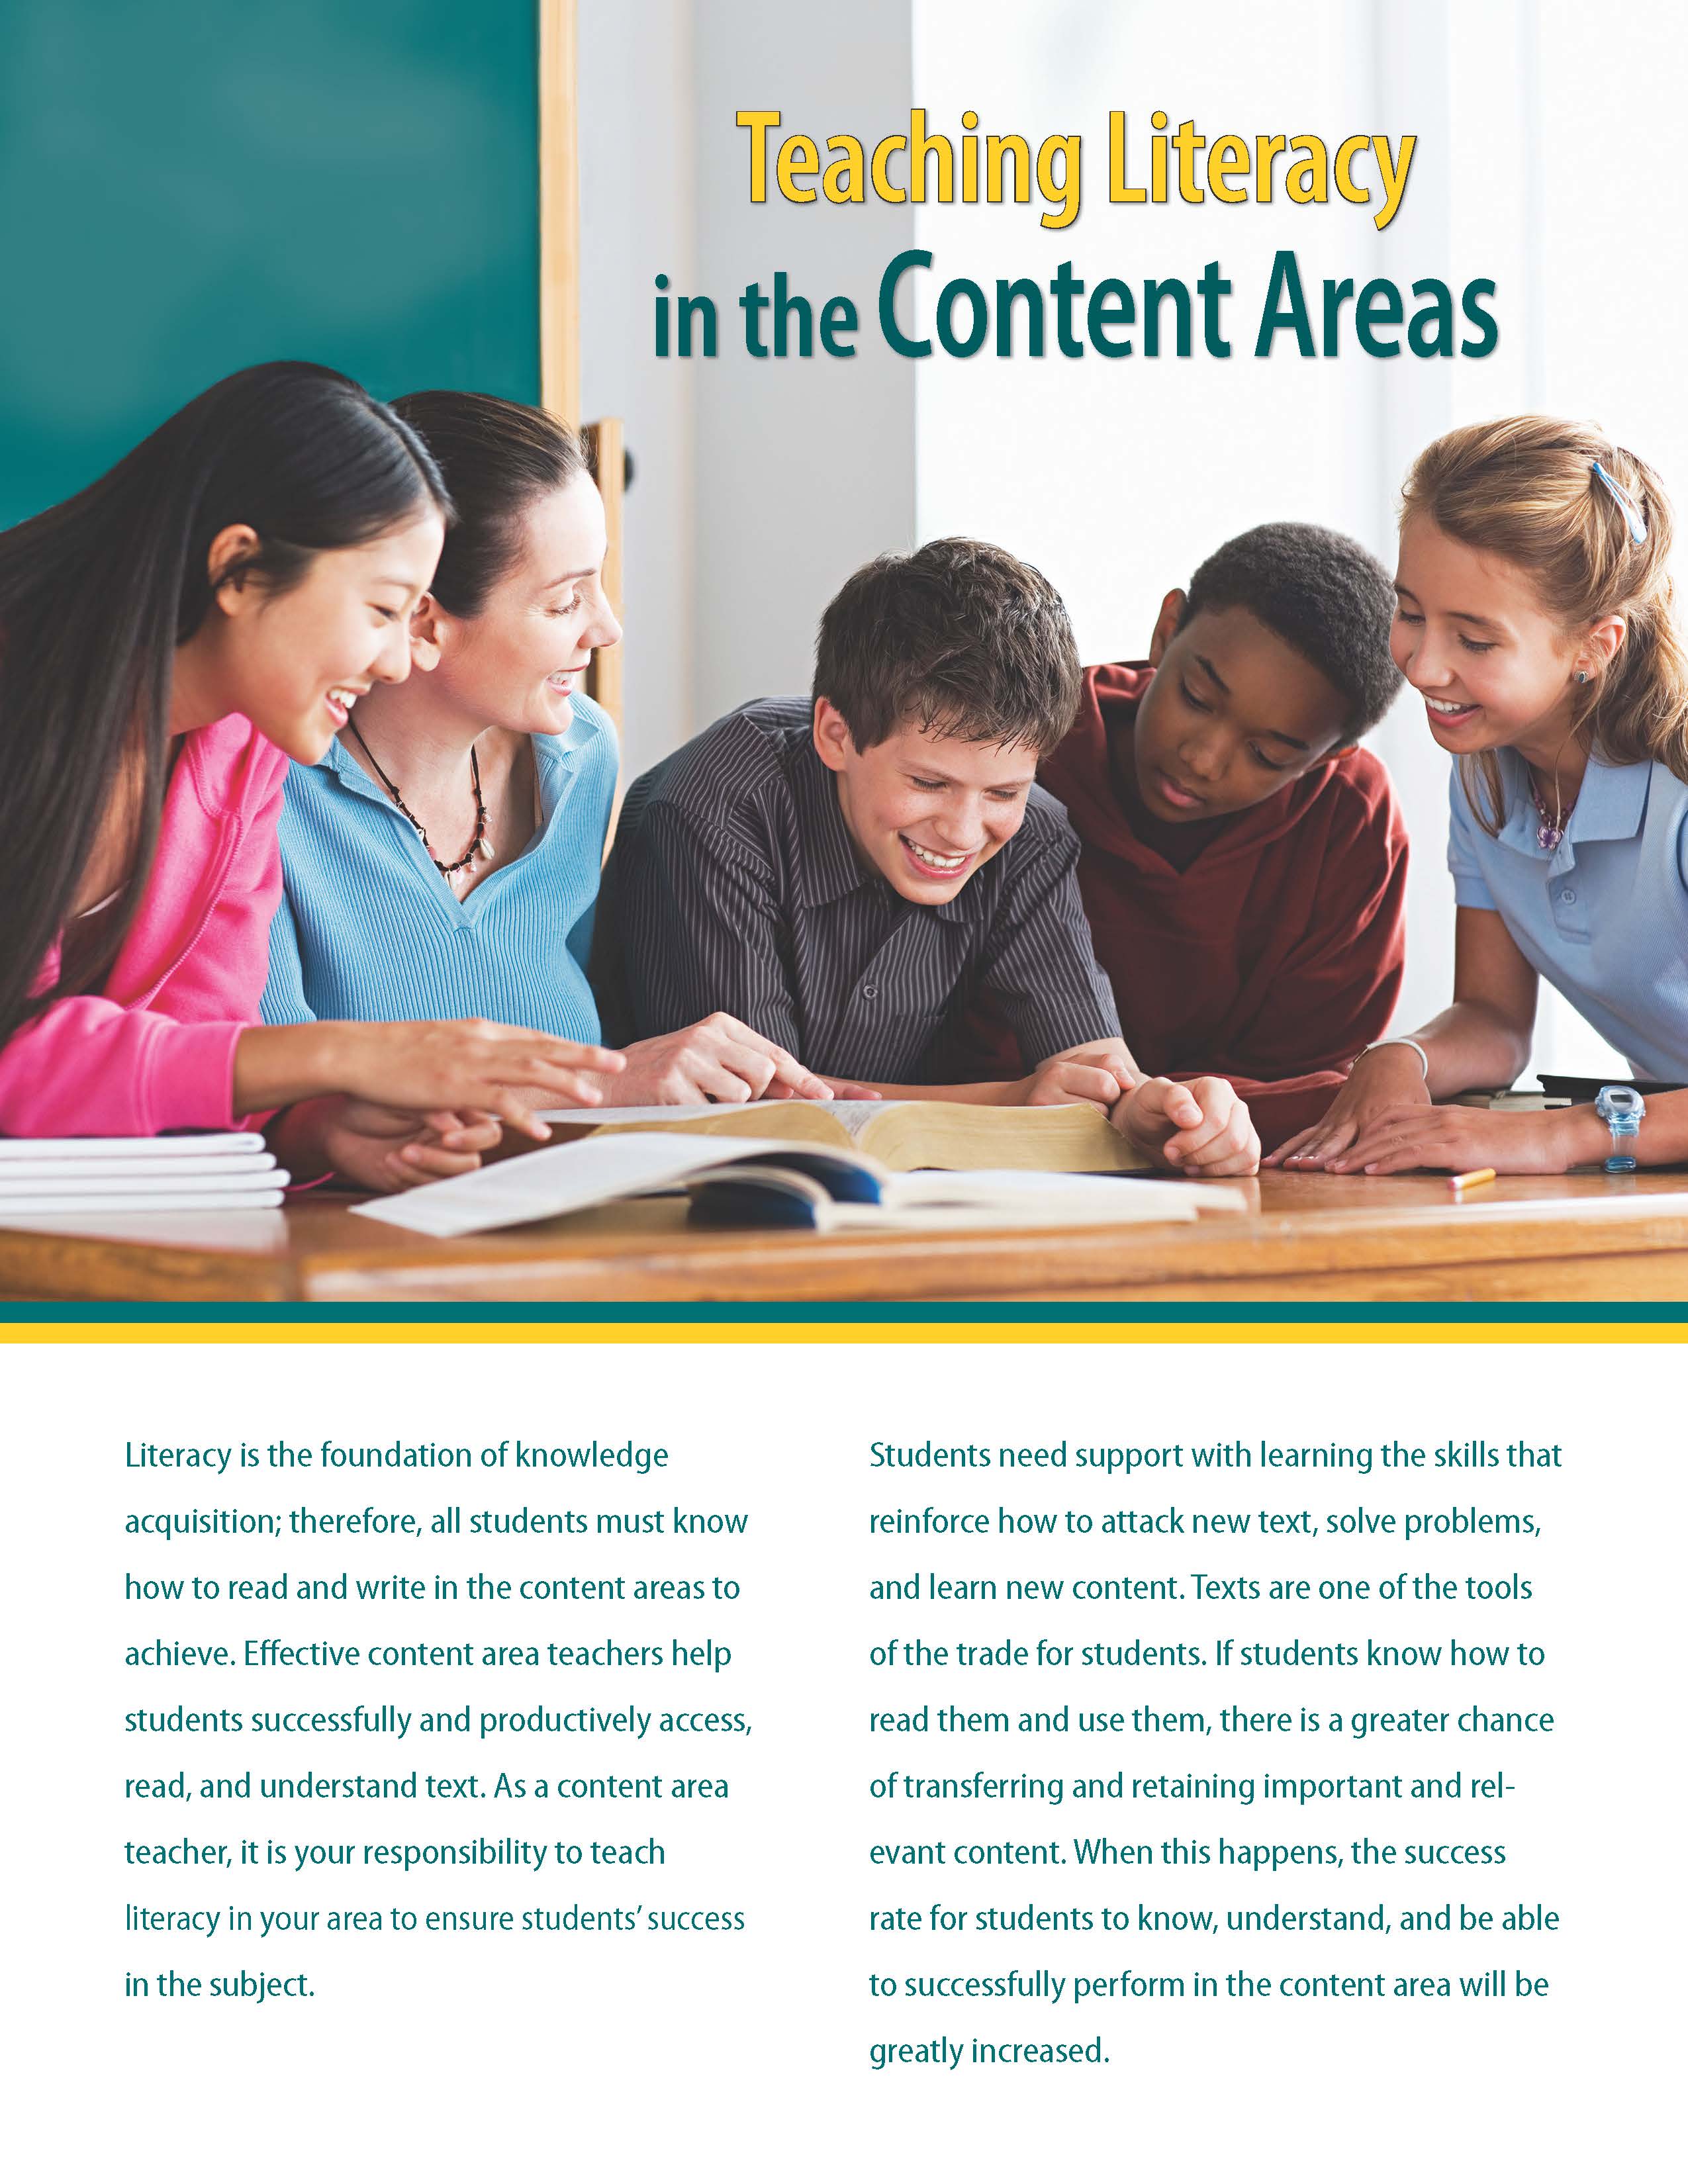 Teaching Literacy in the Content Areas